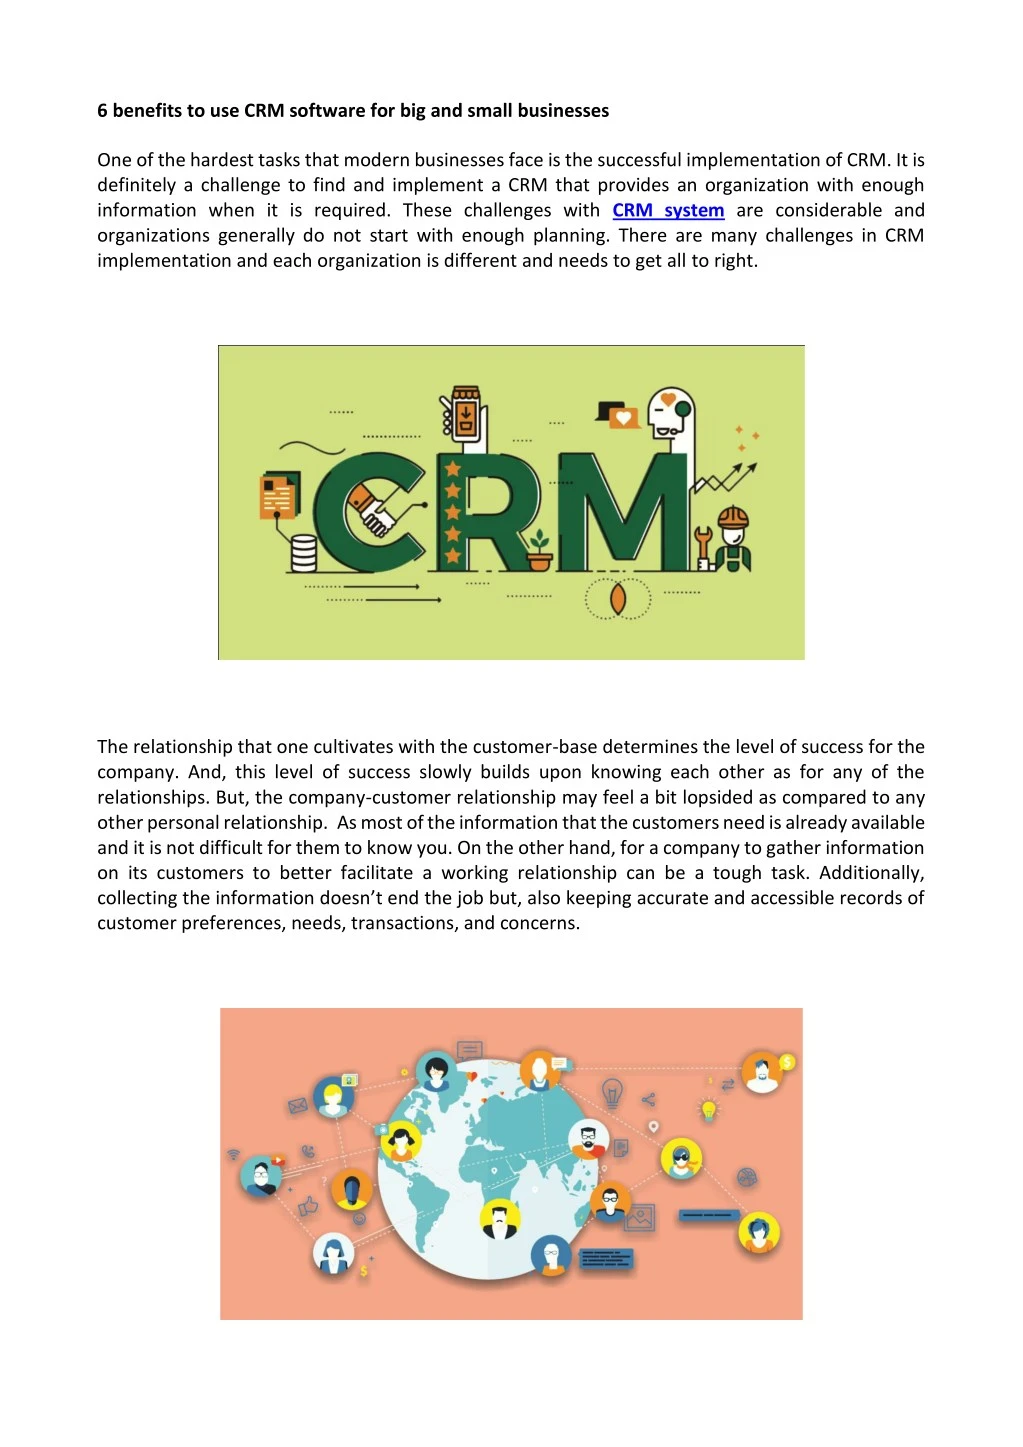 6 benefits to use crm software for big and small